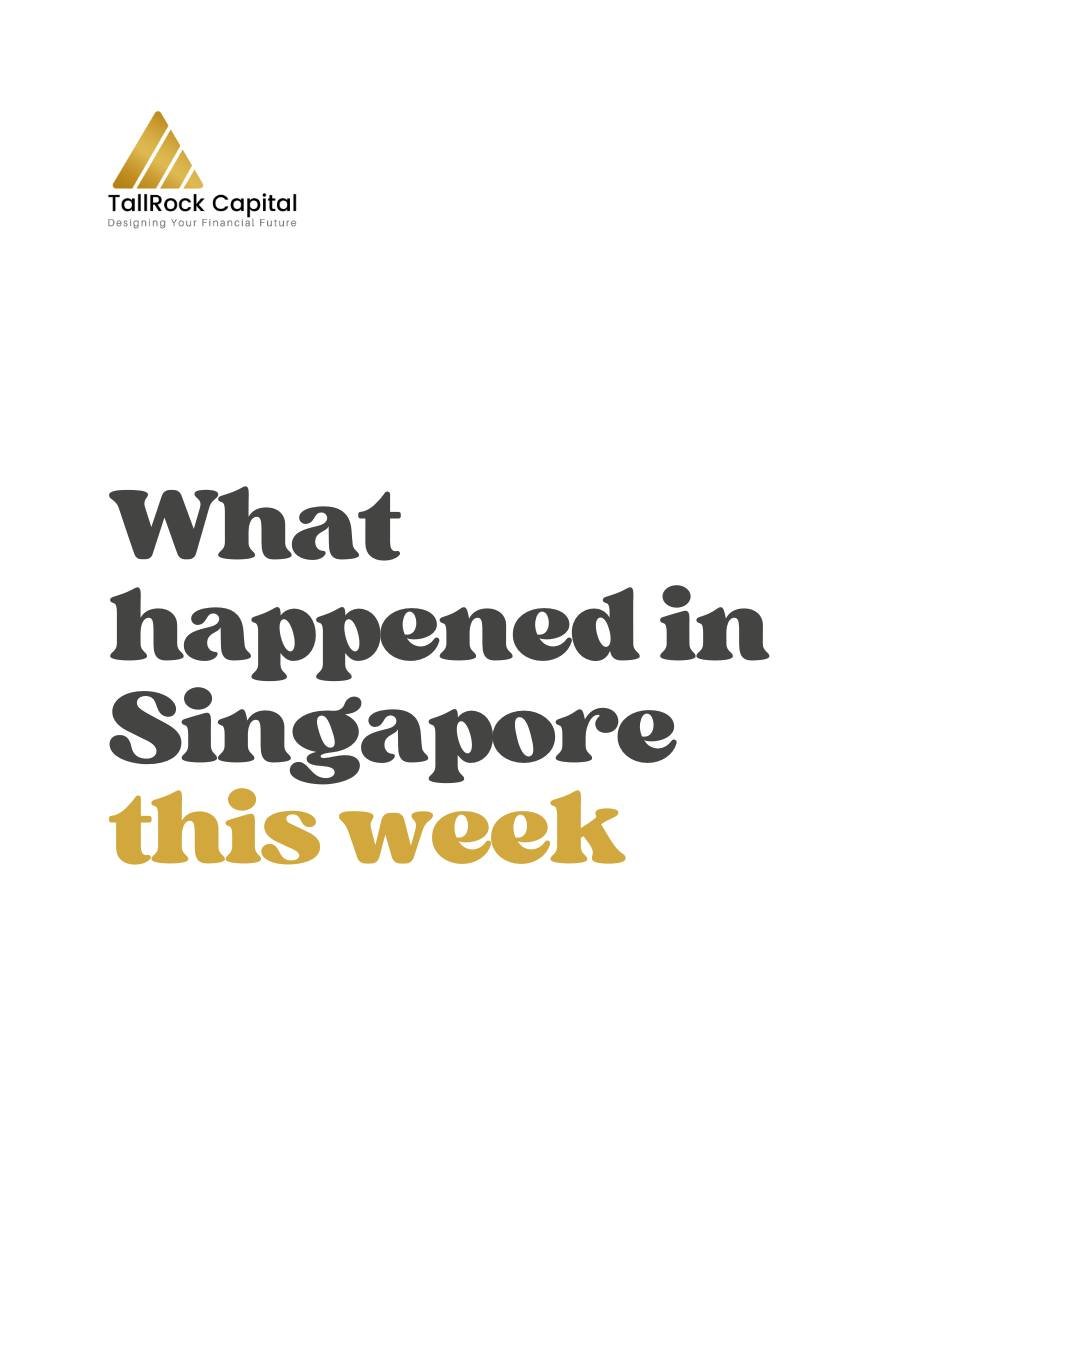 Did you catch all the exciting news in Singapore this week? Our &quot;What Happened in Singapore This Week&quot; post has the recap! From market movements to a historic first in motorsport, stay informed with us. 🇸🇬 

#tallrockcapital #singapore #s